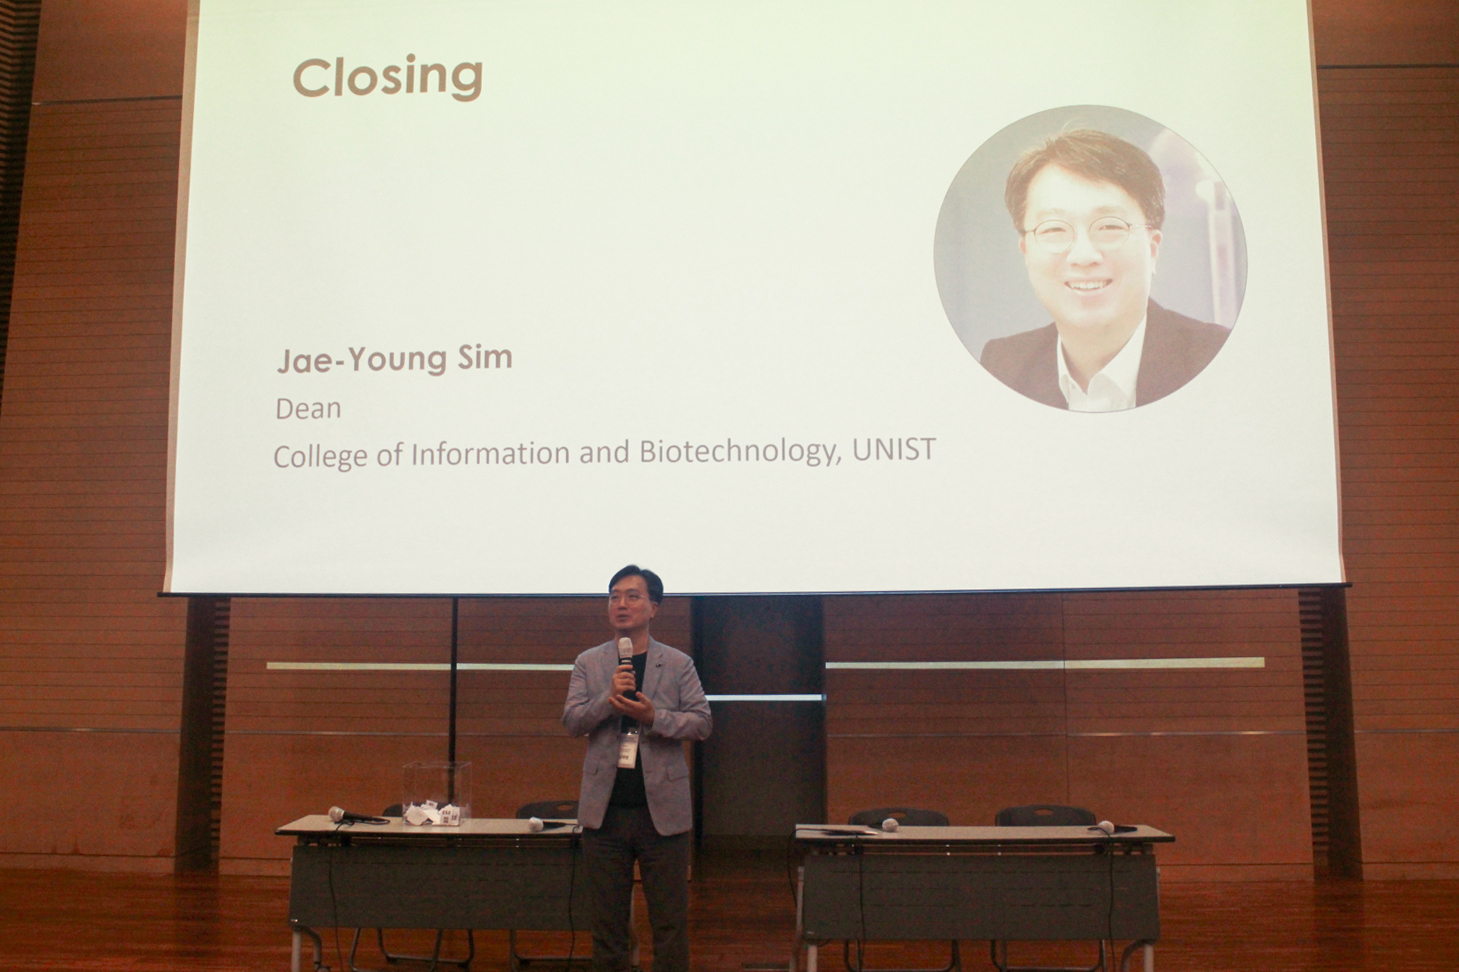 Dean Jae-Young Sim of UNIST Artificial Intelligence Graduate School is delivering the closing remarks at the 2023 UNIST AI Technology Open Workshop on September 21, 2023.